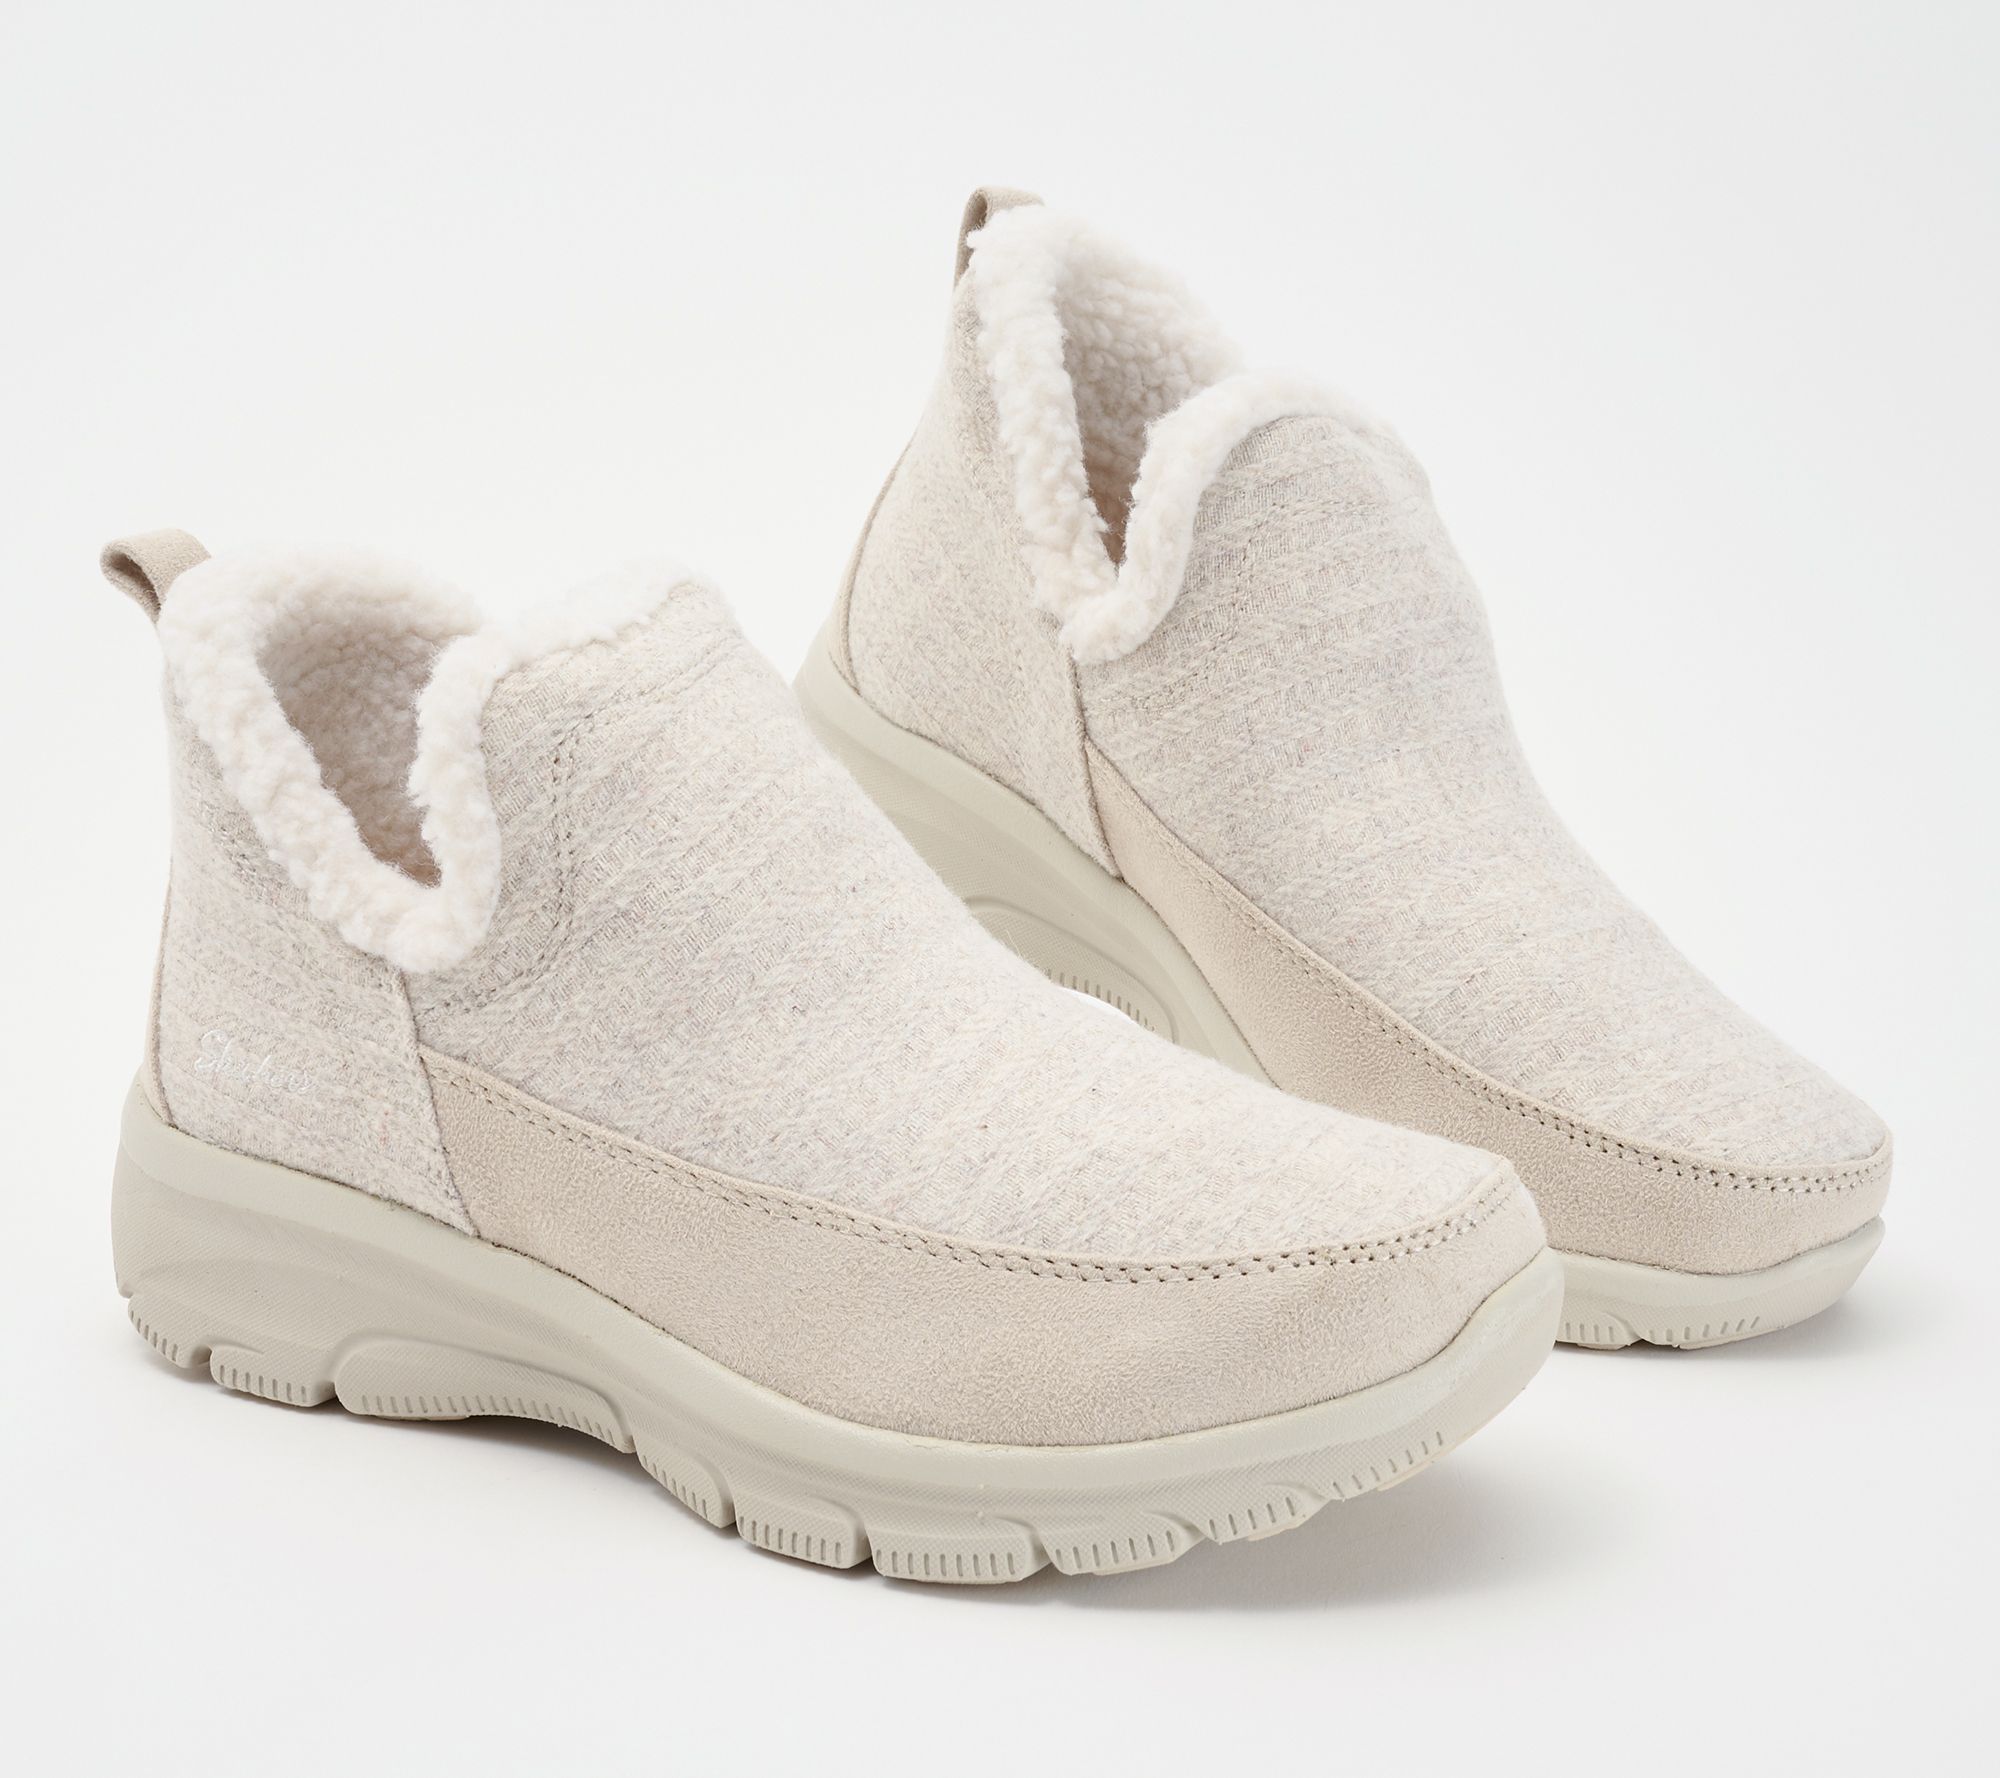 legal Dibujar adverbio Skechers Relaxed Fit Faux Fur Wool Ankle Boots - Easy Going - QVC.com